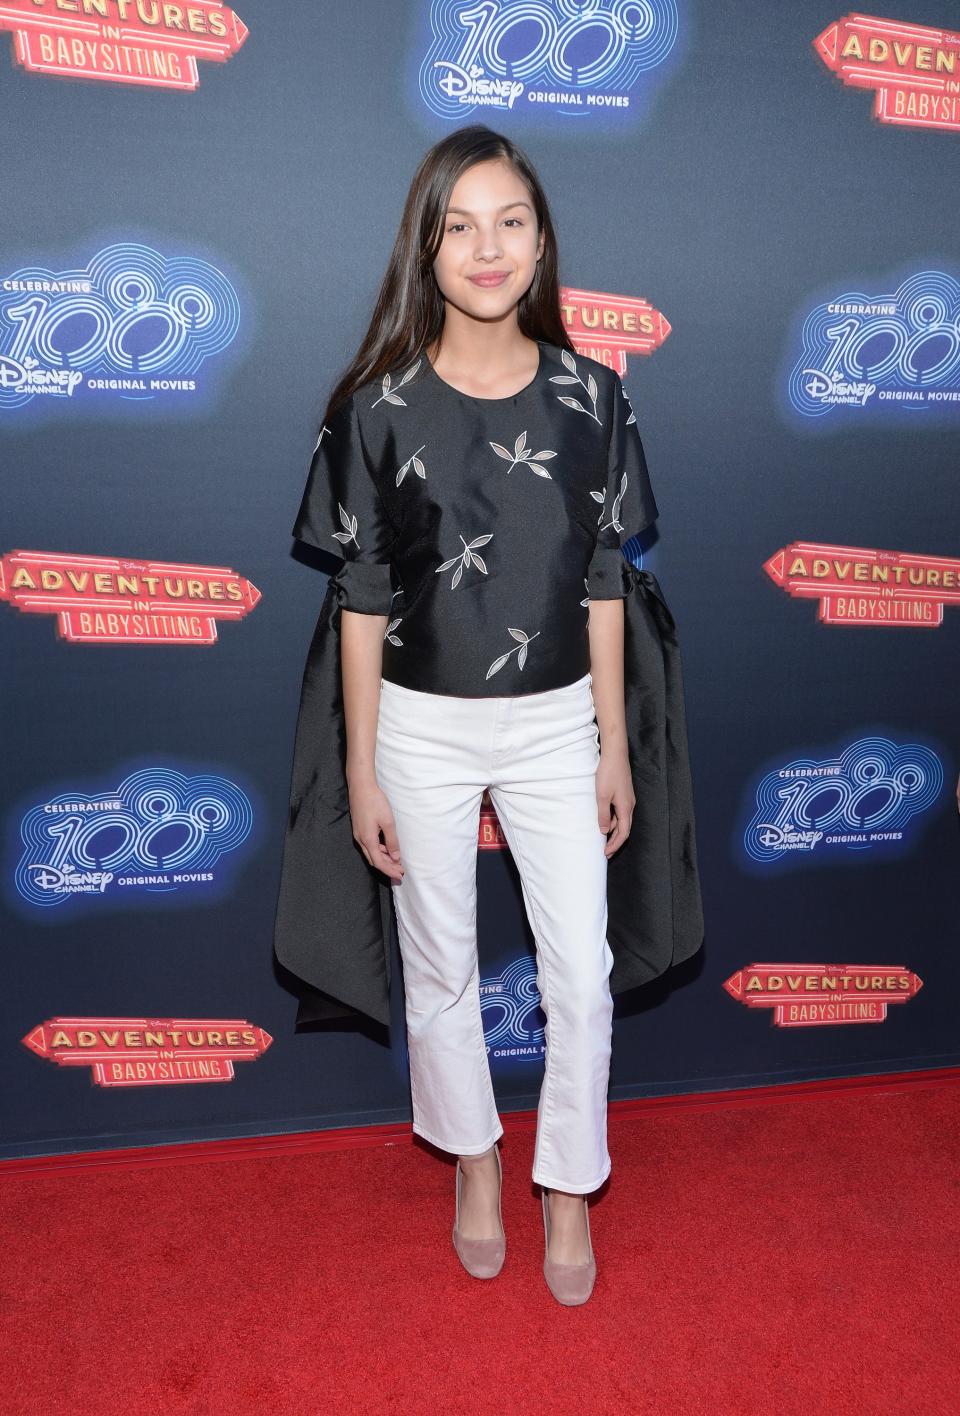 <h1 class="title">Premiere Of 100th Disney Channel Original Movie "Adventures In Babysitting" And Celebration Of All DCOMS - Arrivals</h1><cite class="credit">Michael Tullberg/Getty Images</cite>